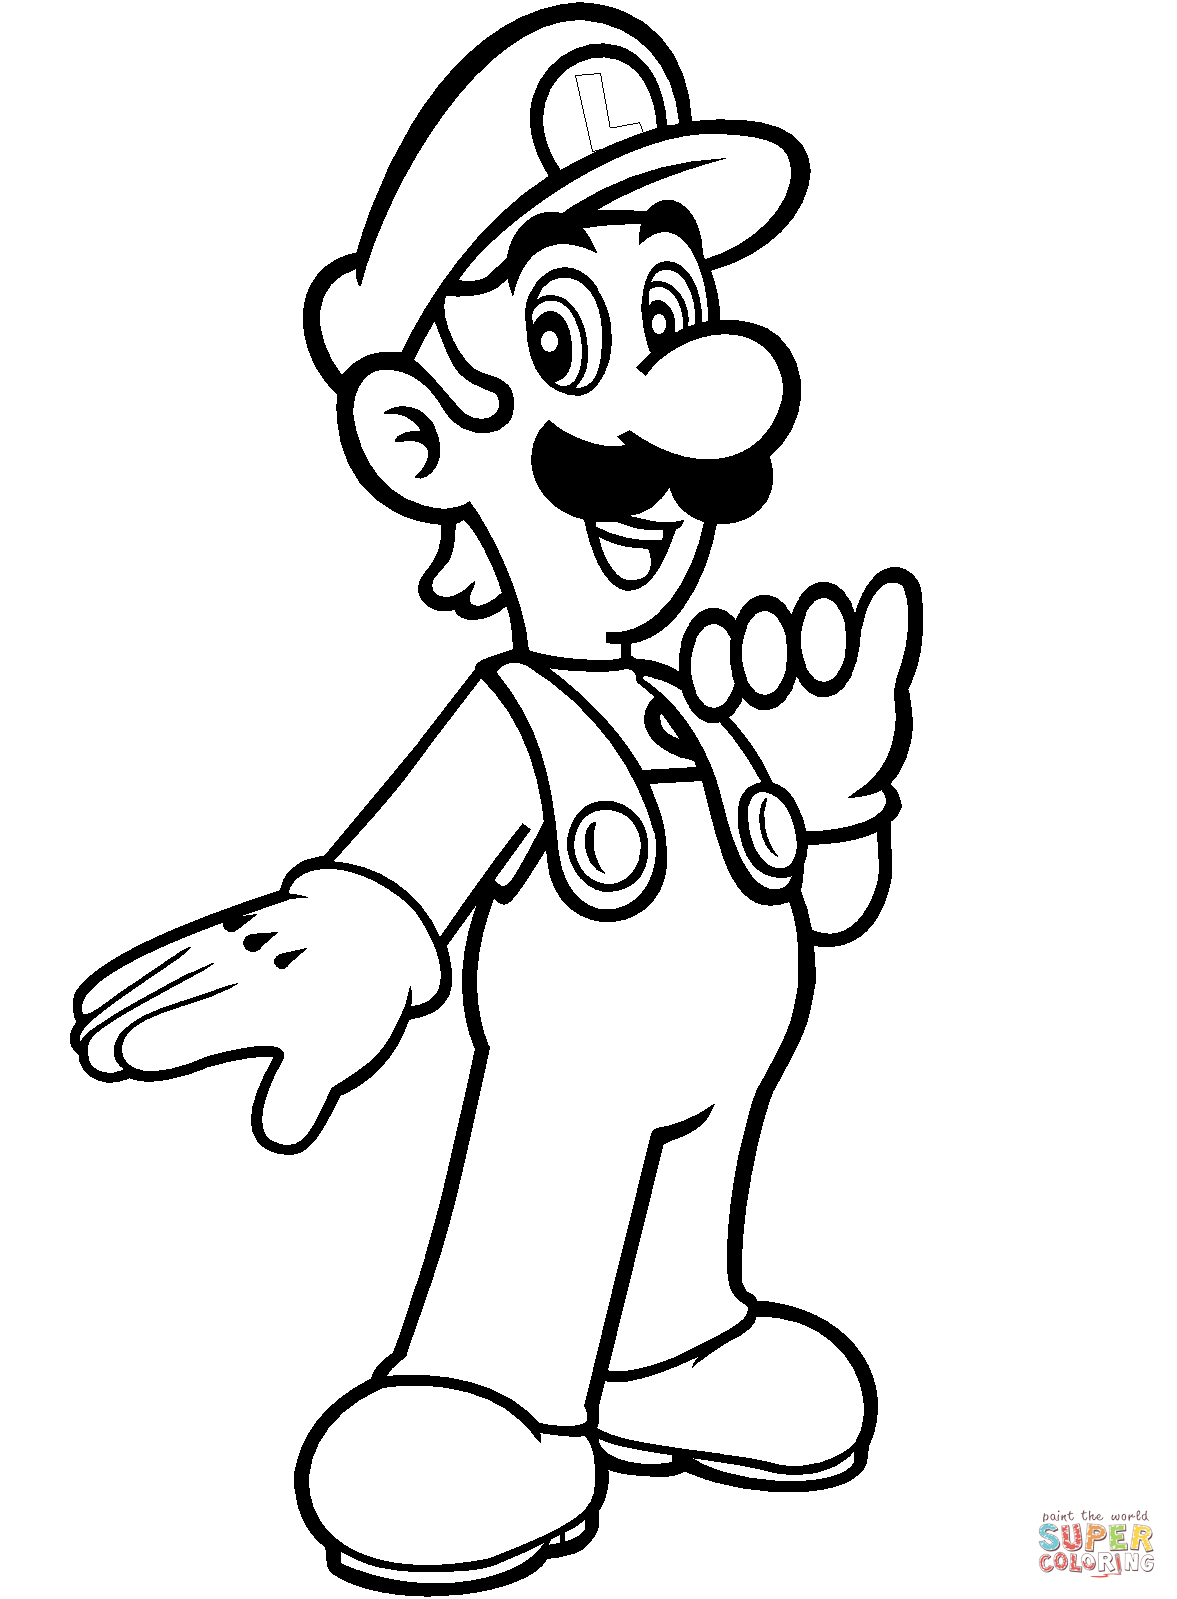 1177x1599 Luigi from Mario Bros coloring page Free Printable Coloring Pages